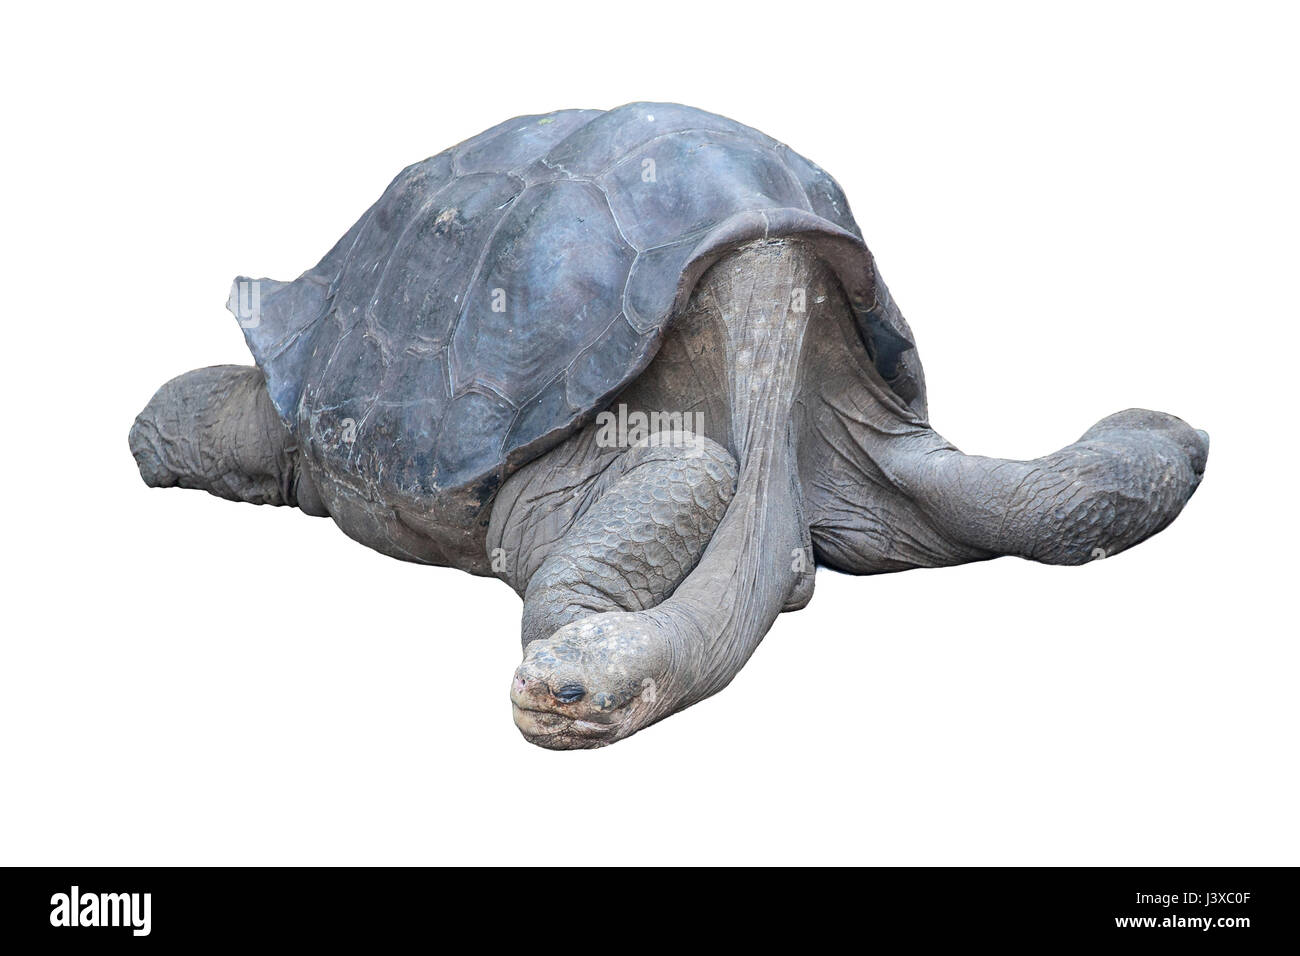 Lonesome George, peacefully resting. He was the last Pinta Island Galapagos tortoise. Photographed on a white background. Stock Photo